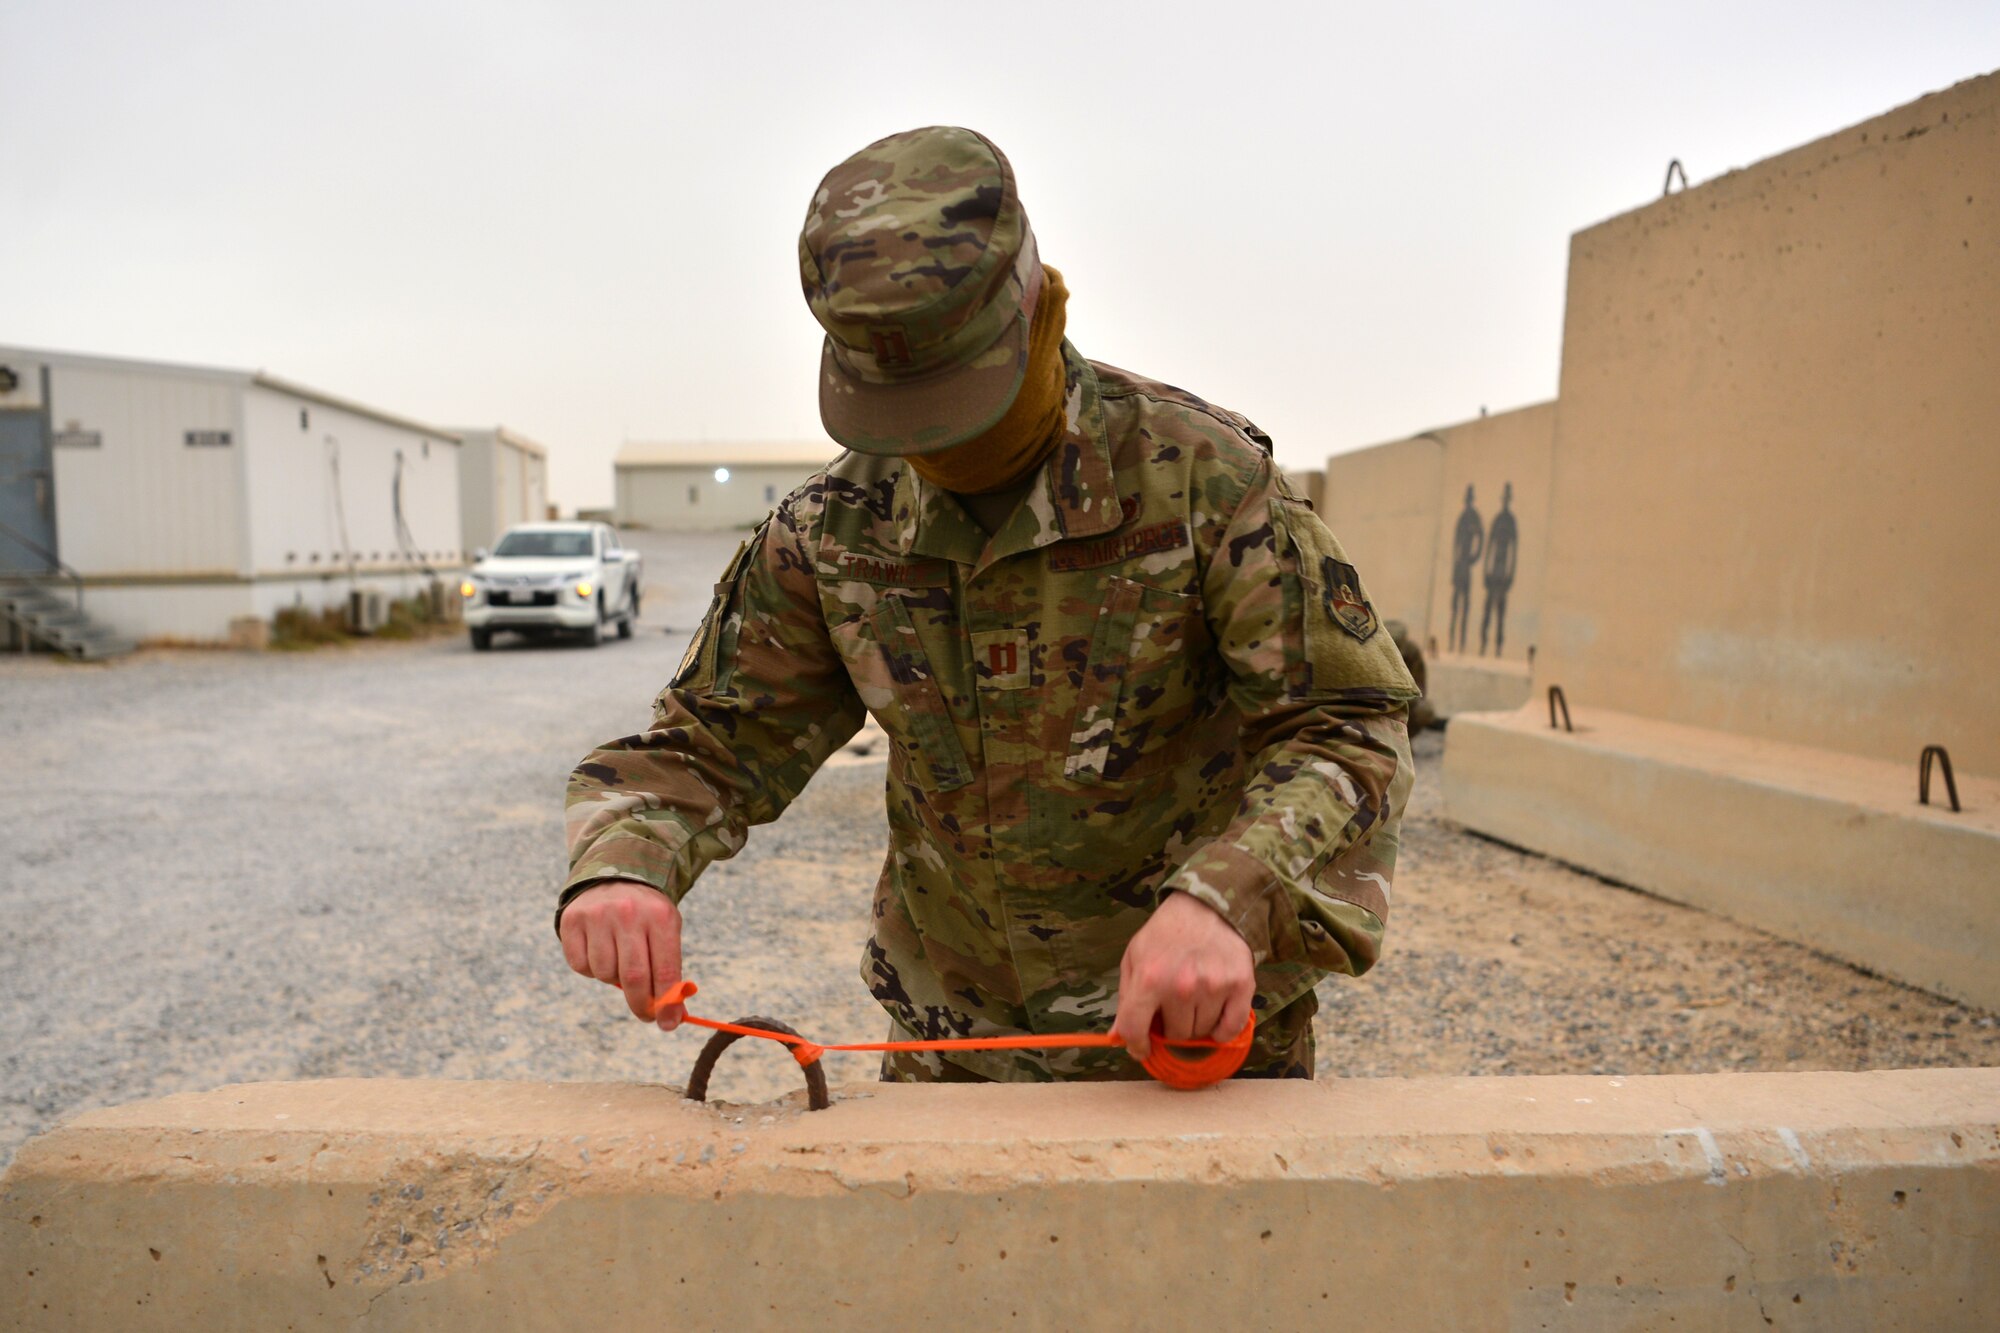 Airman ties reflective tape to barrier